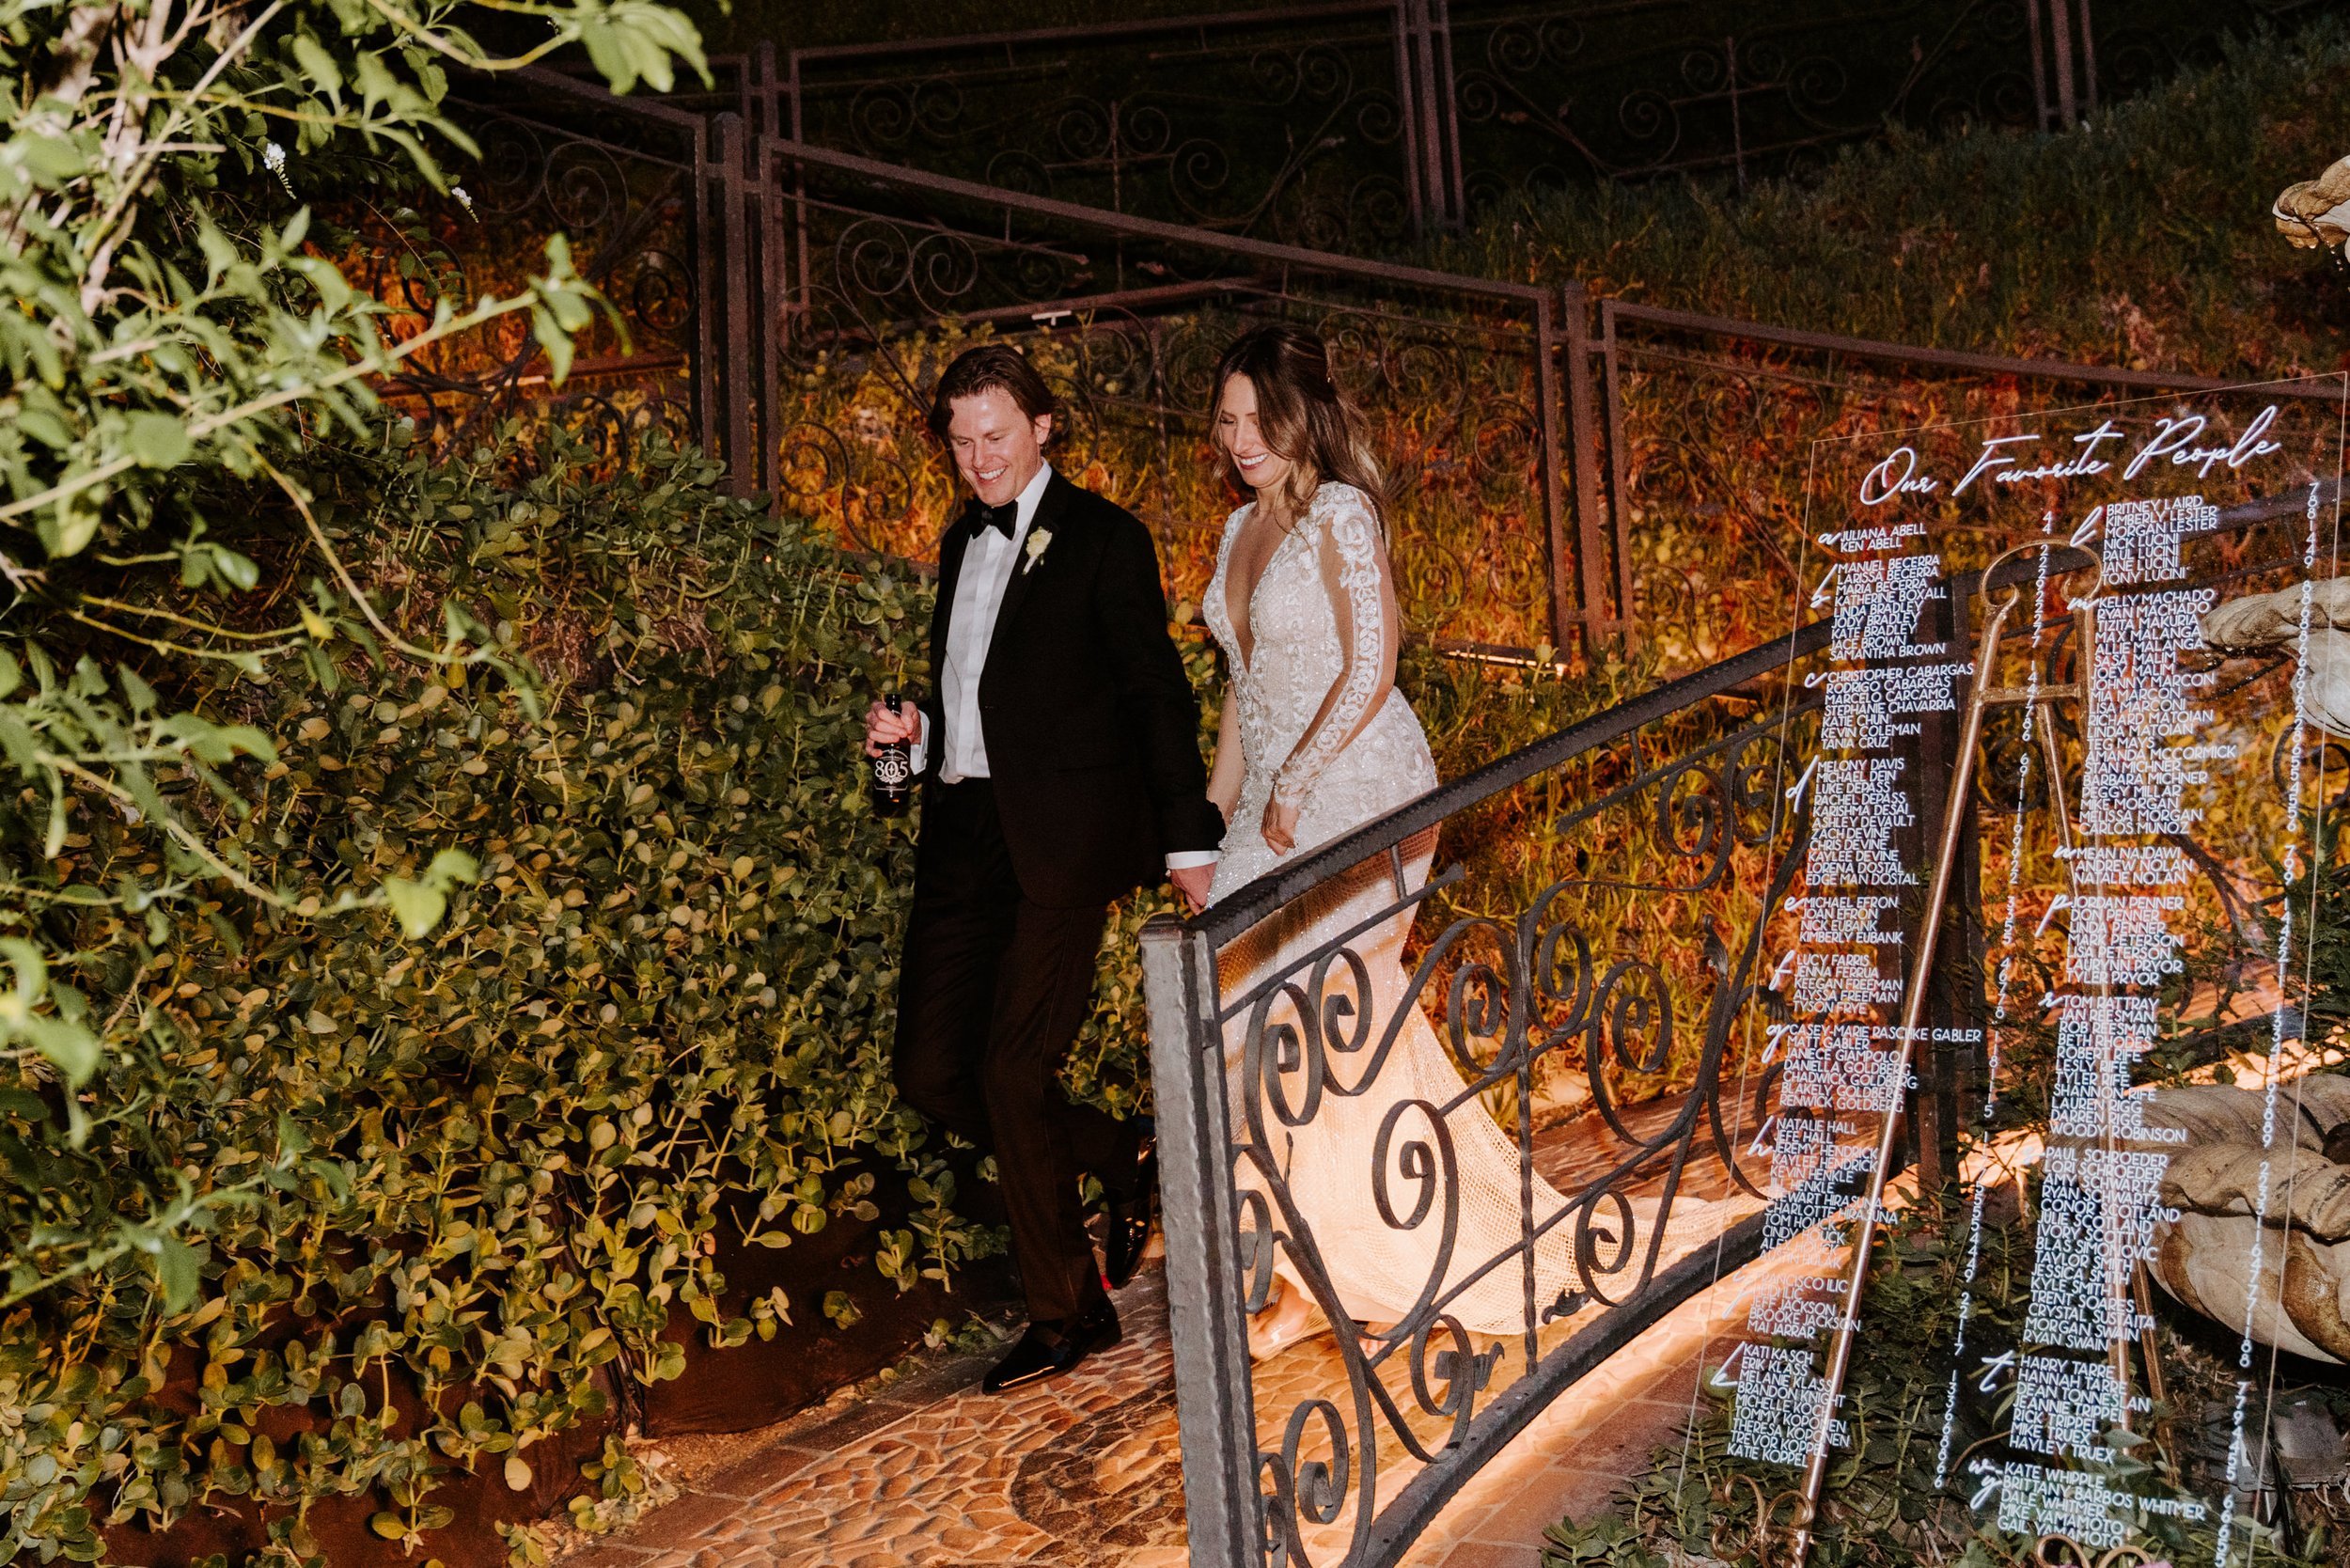 Bride and groom wedding reception entrance at The Houdini Estate wedding in los angeles, candid and vibrant wedding photography by Tida Svy